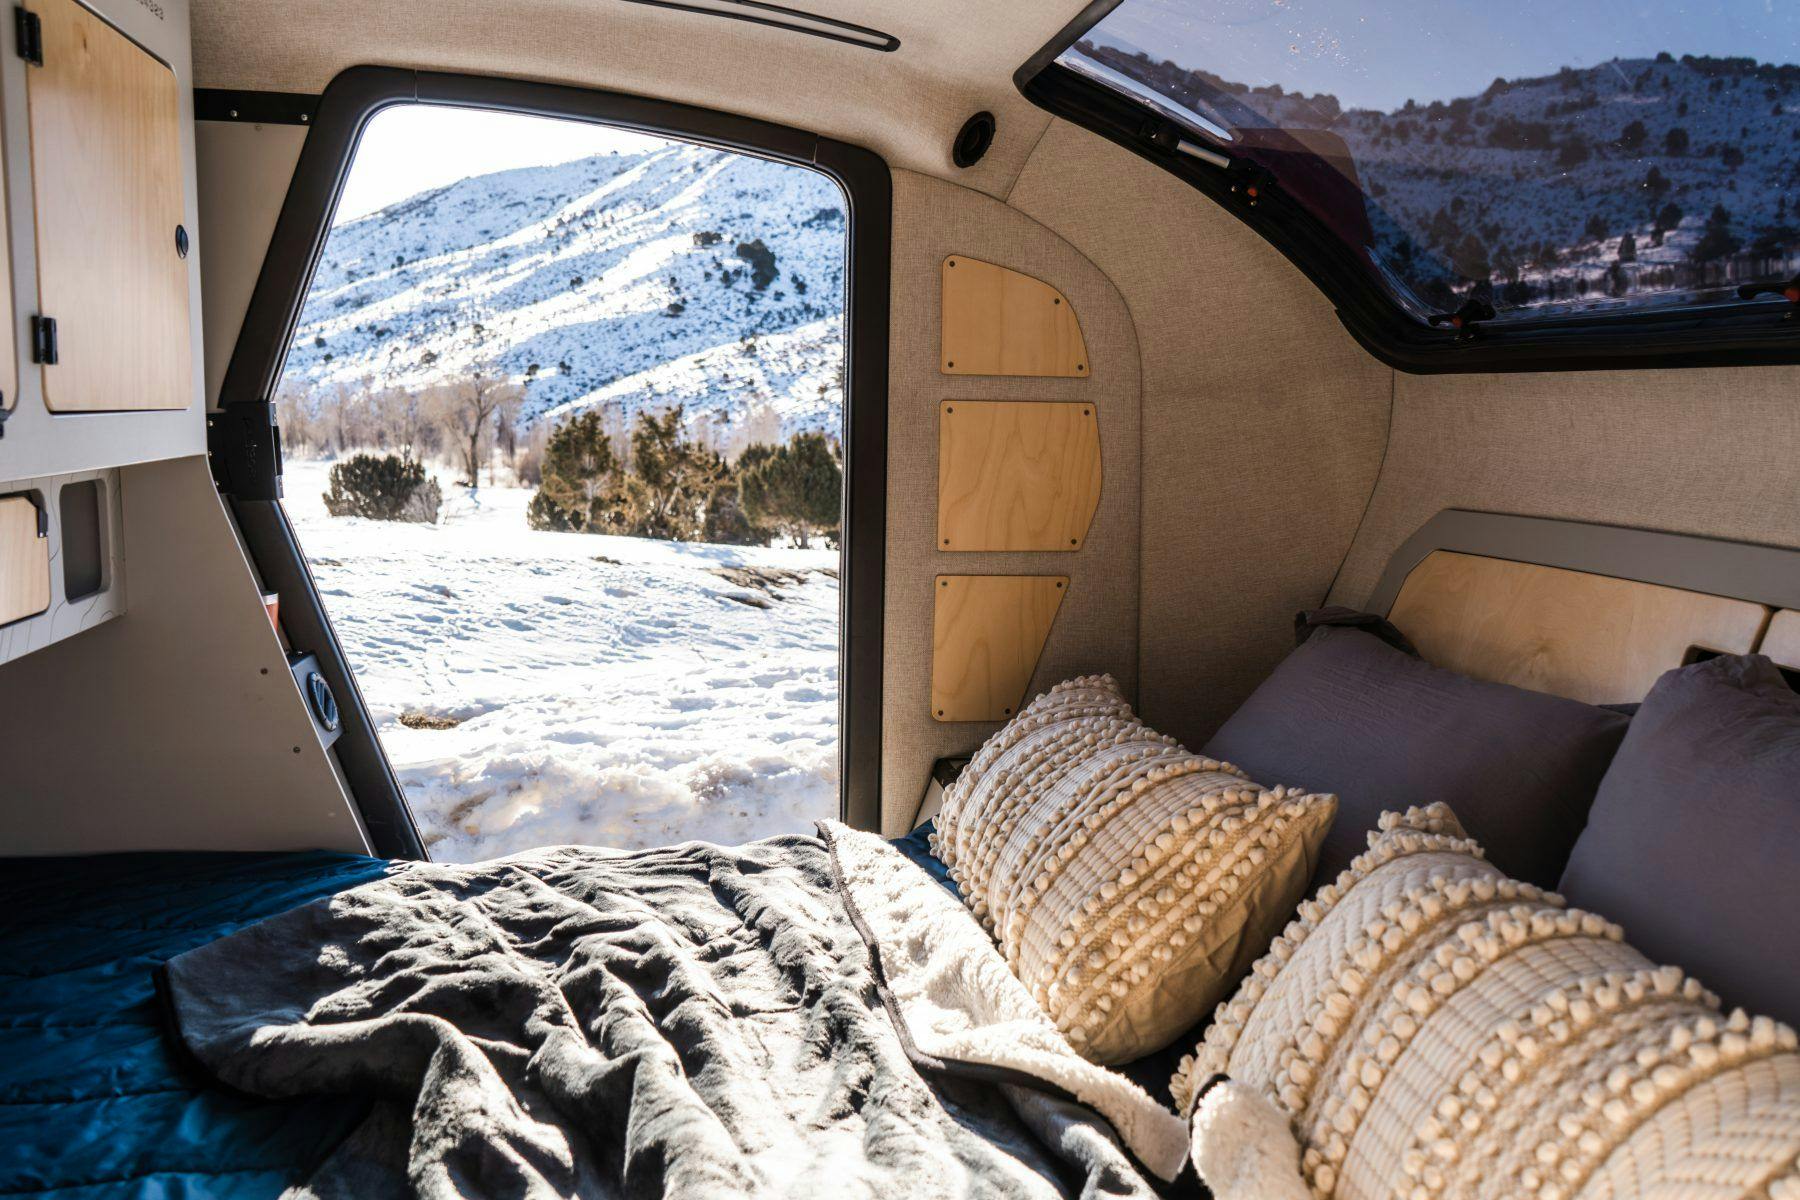 A cozy interior of a teardrop trailer during the winter months.